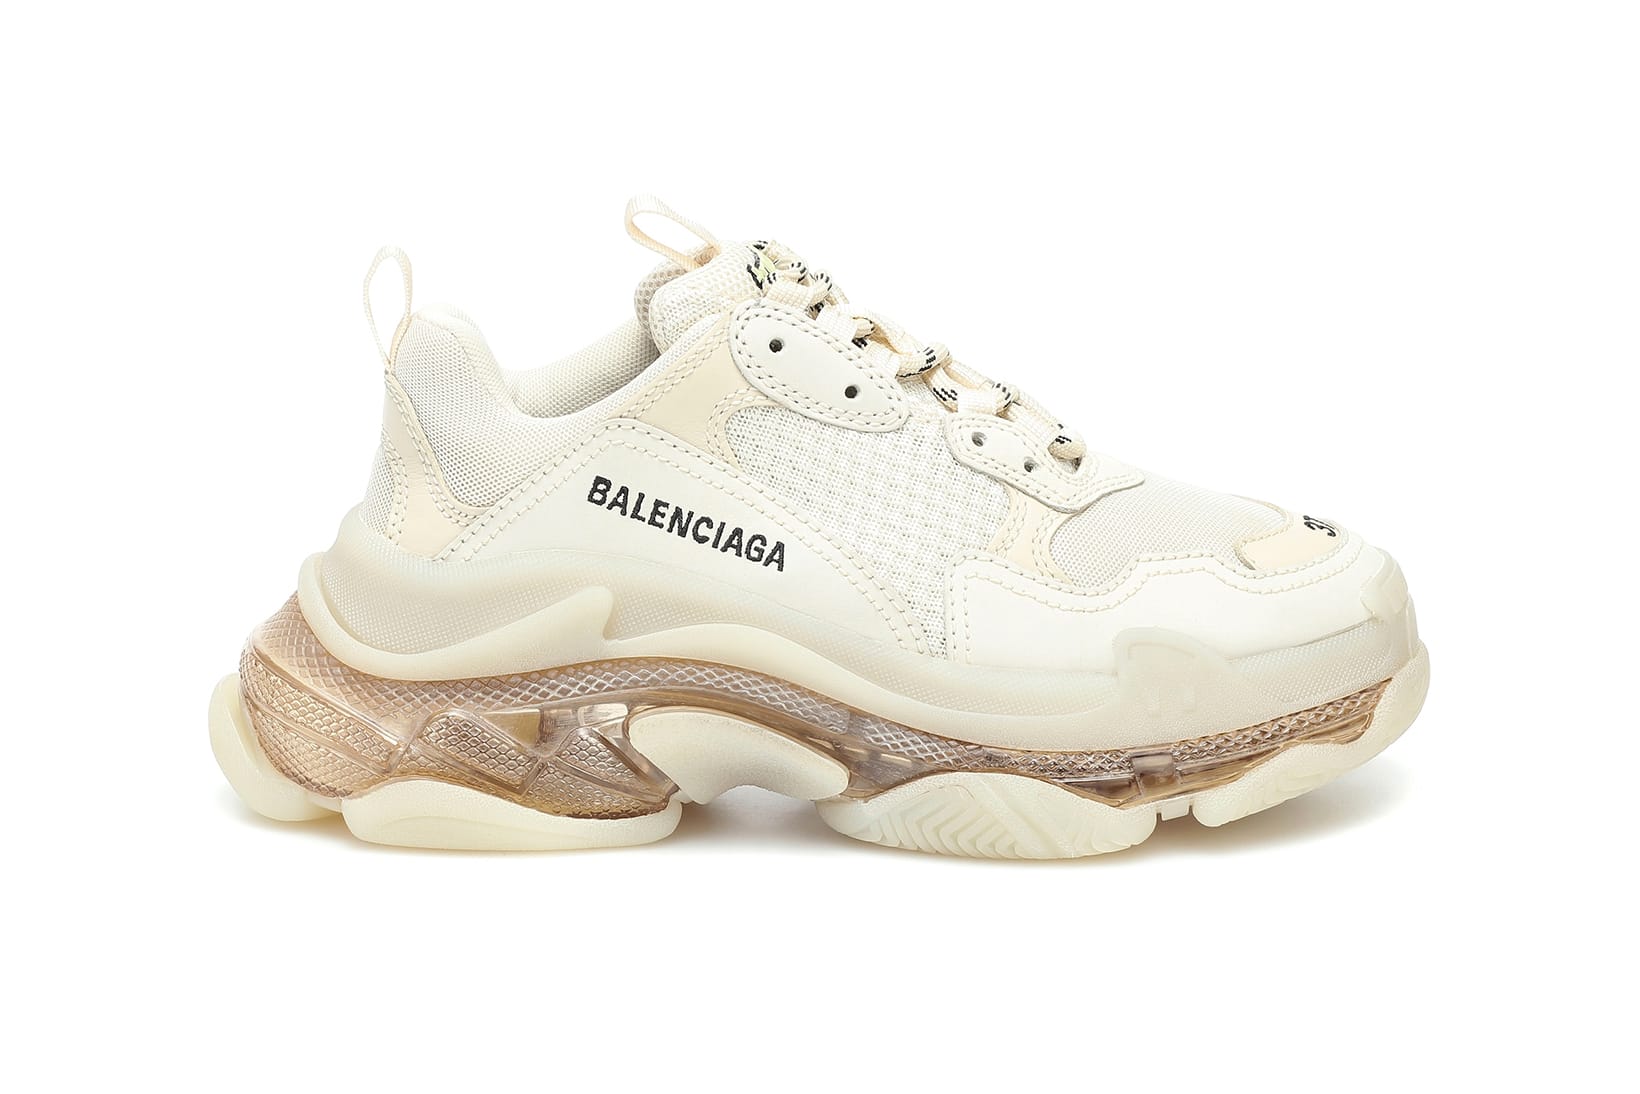 HOW TO STYLE THE BALENCiAGA TRiPLE S STYLiNG